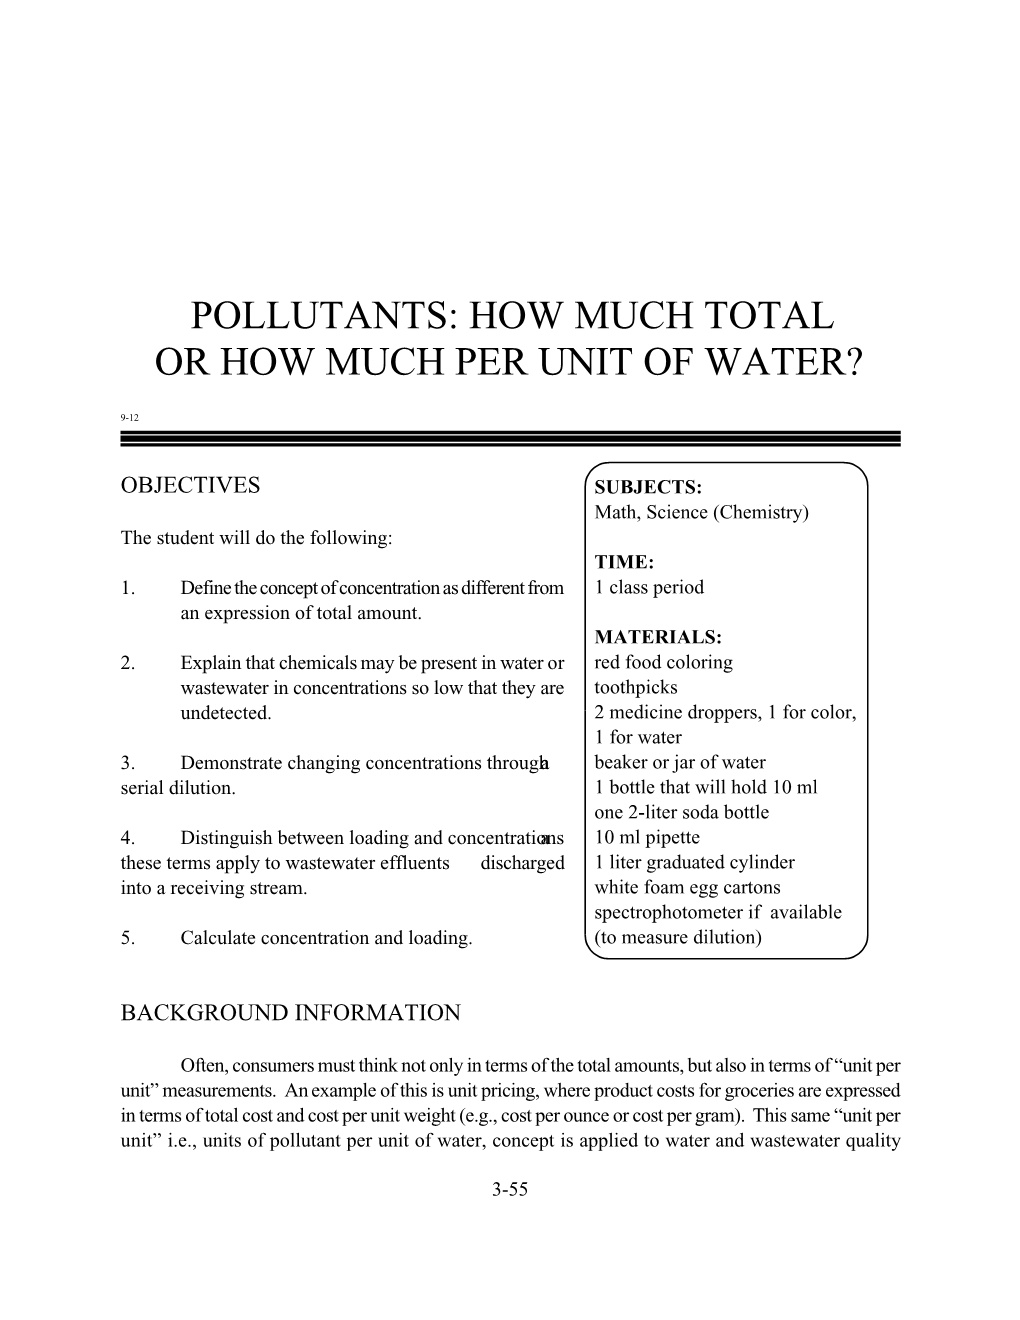 Pollutants: How Much Total Or How Much Per Unit of Water?